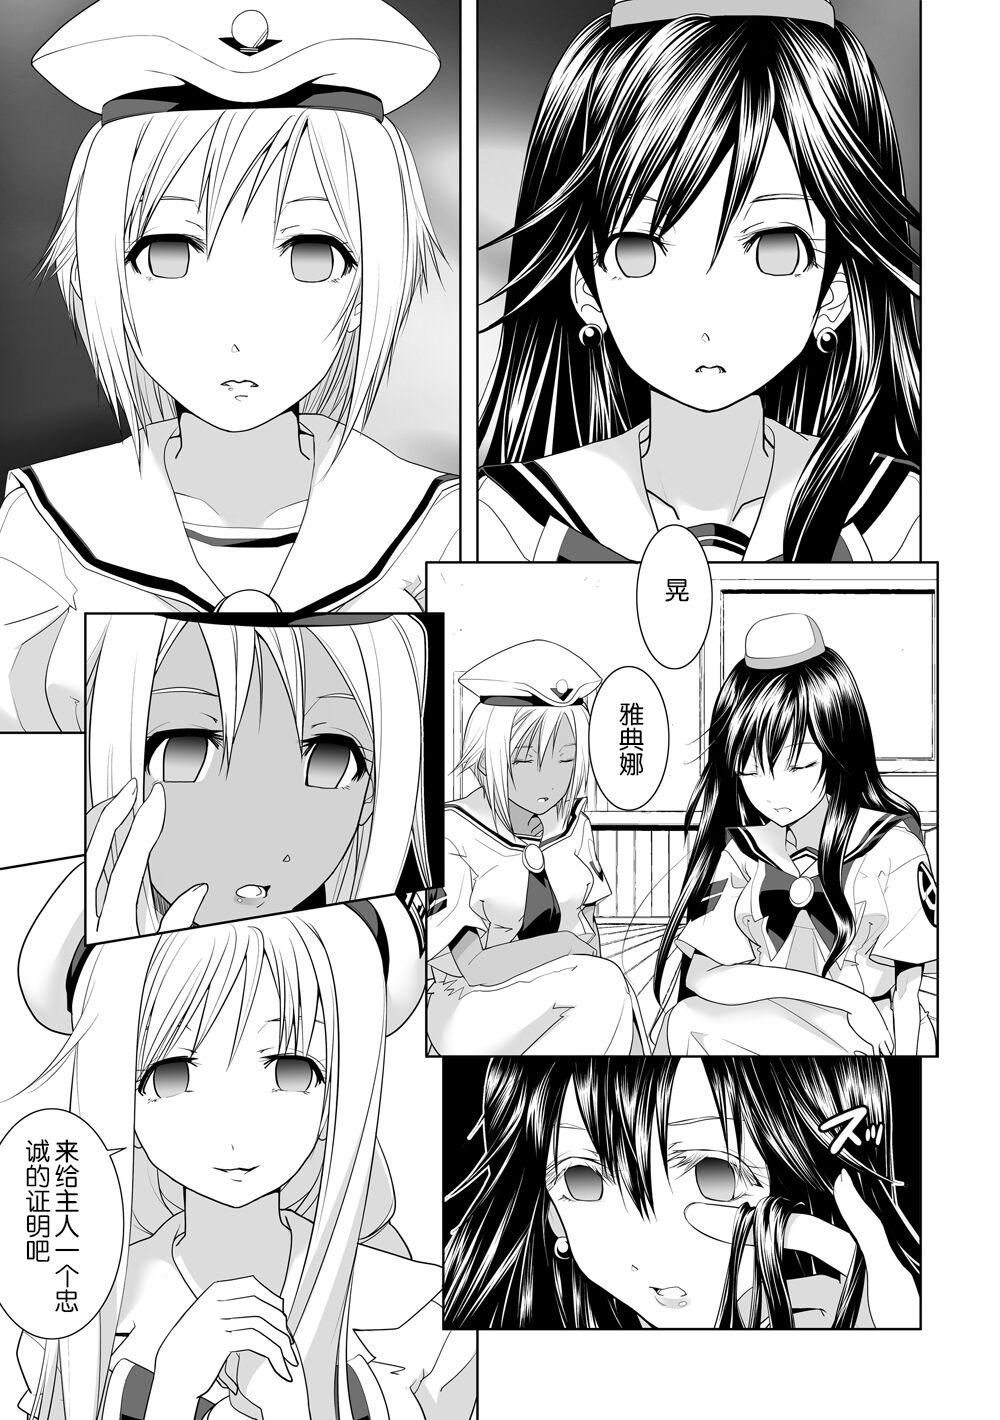 Pussyeating AR*A Mind-control Manga - Aria Mofos - Page 9